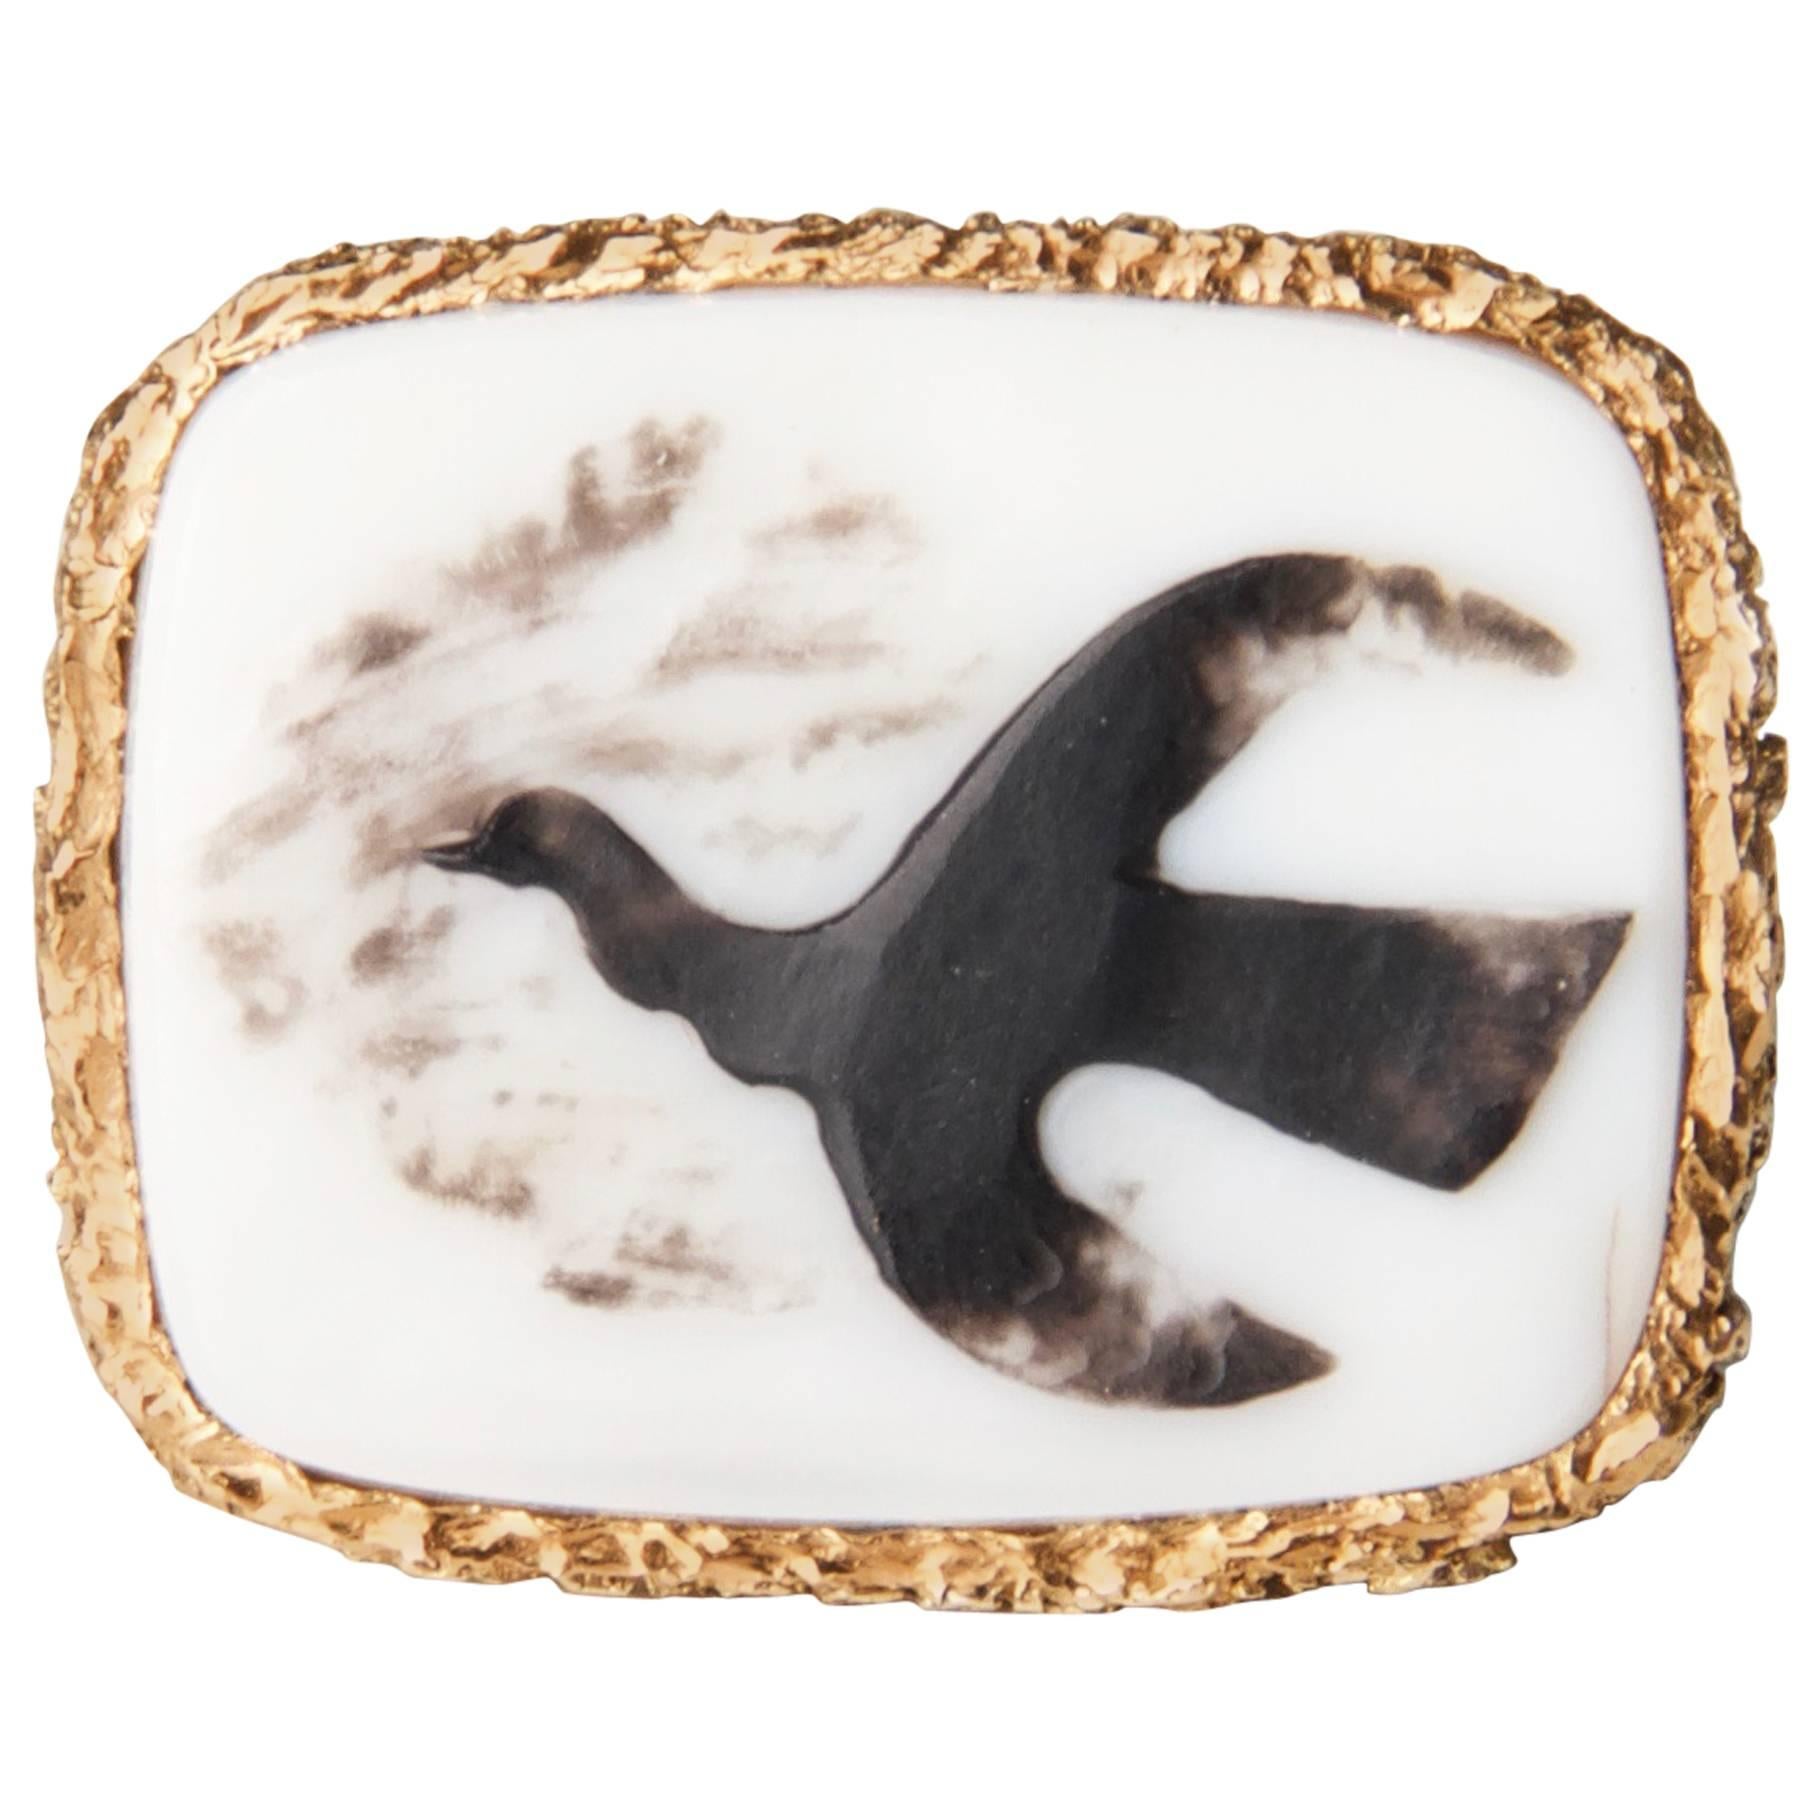 1962 Rare Georges Braque Megaletor III Onyx White Agate Gold Cameo Ring